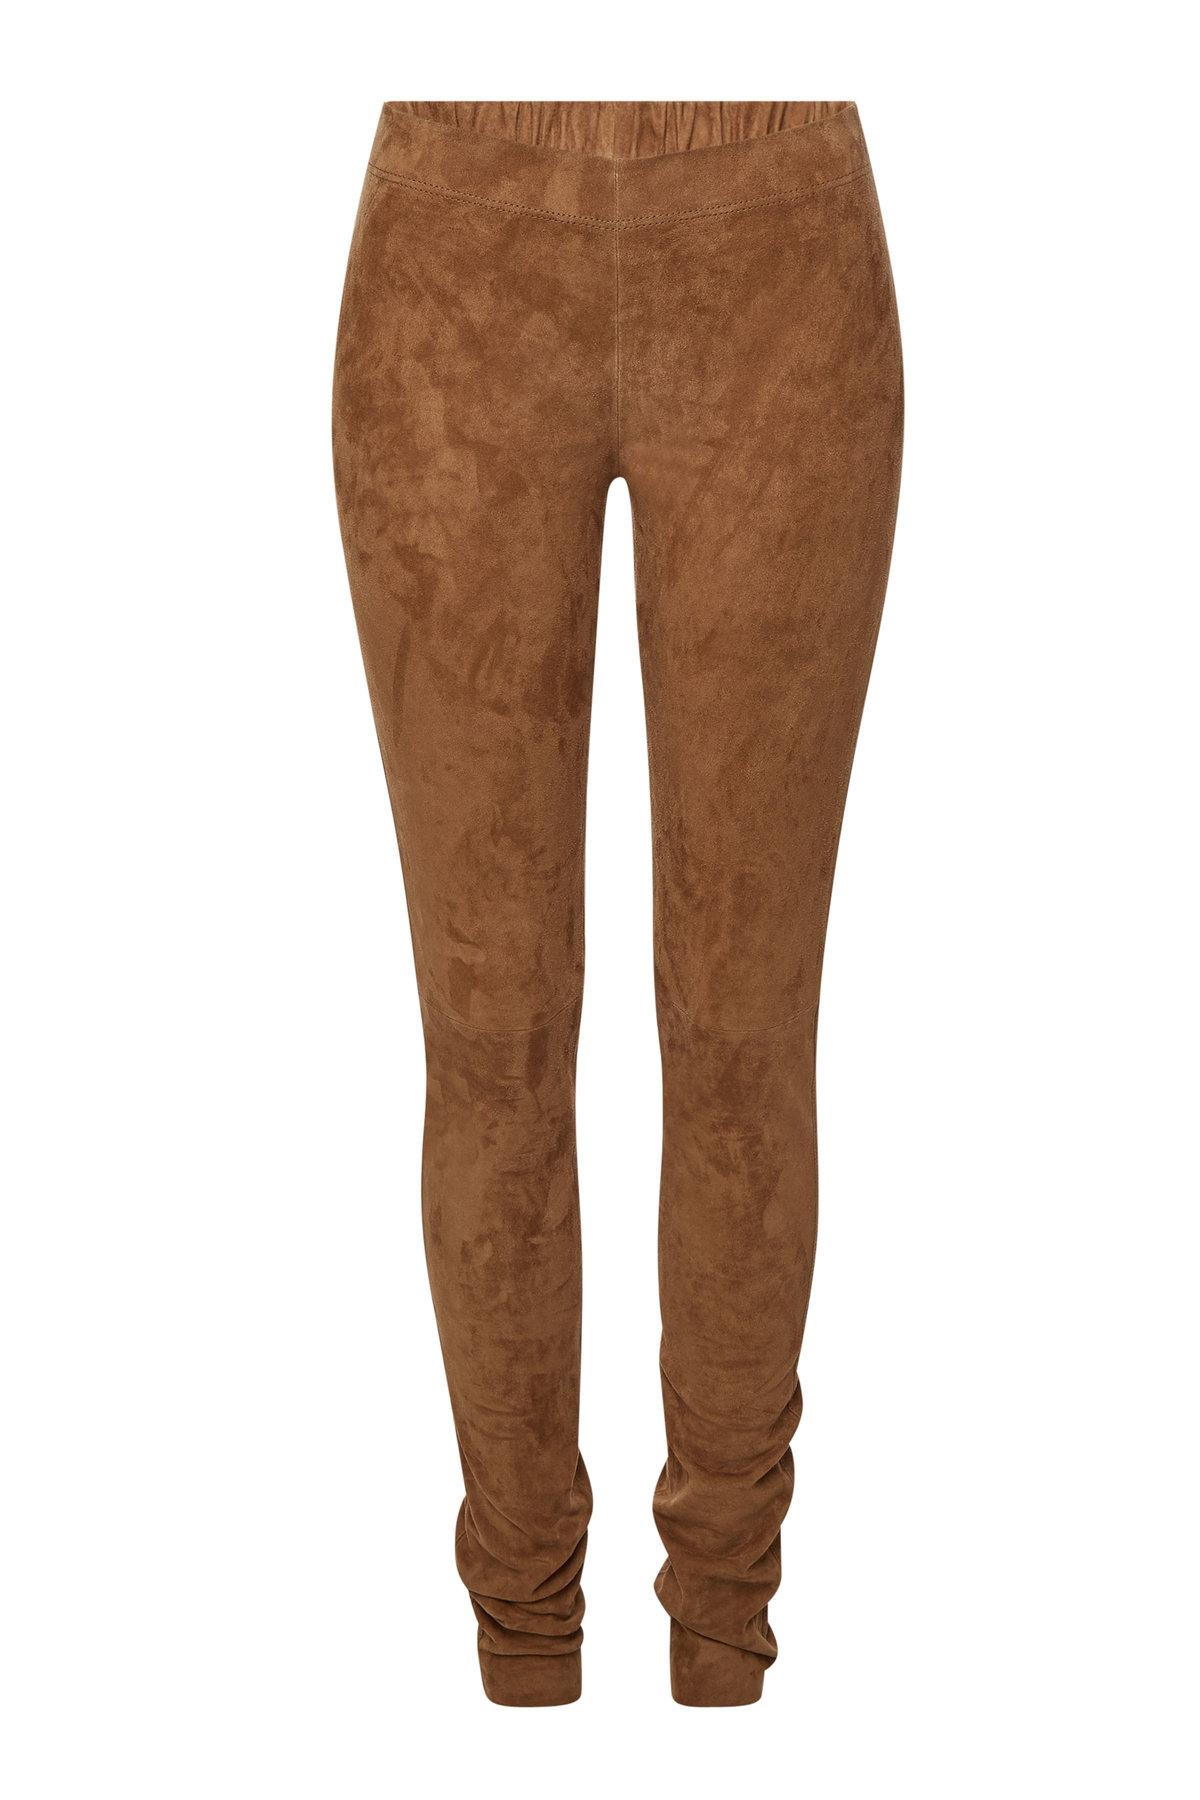 brown suede leggings outfits for men